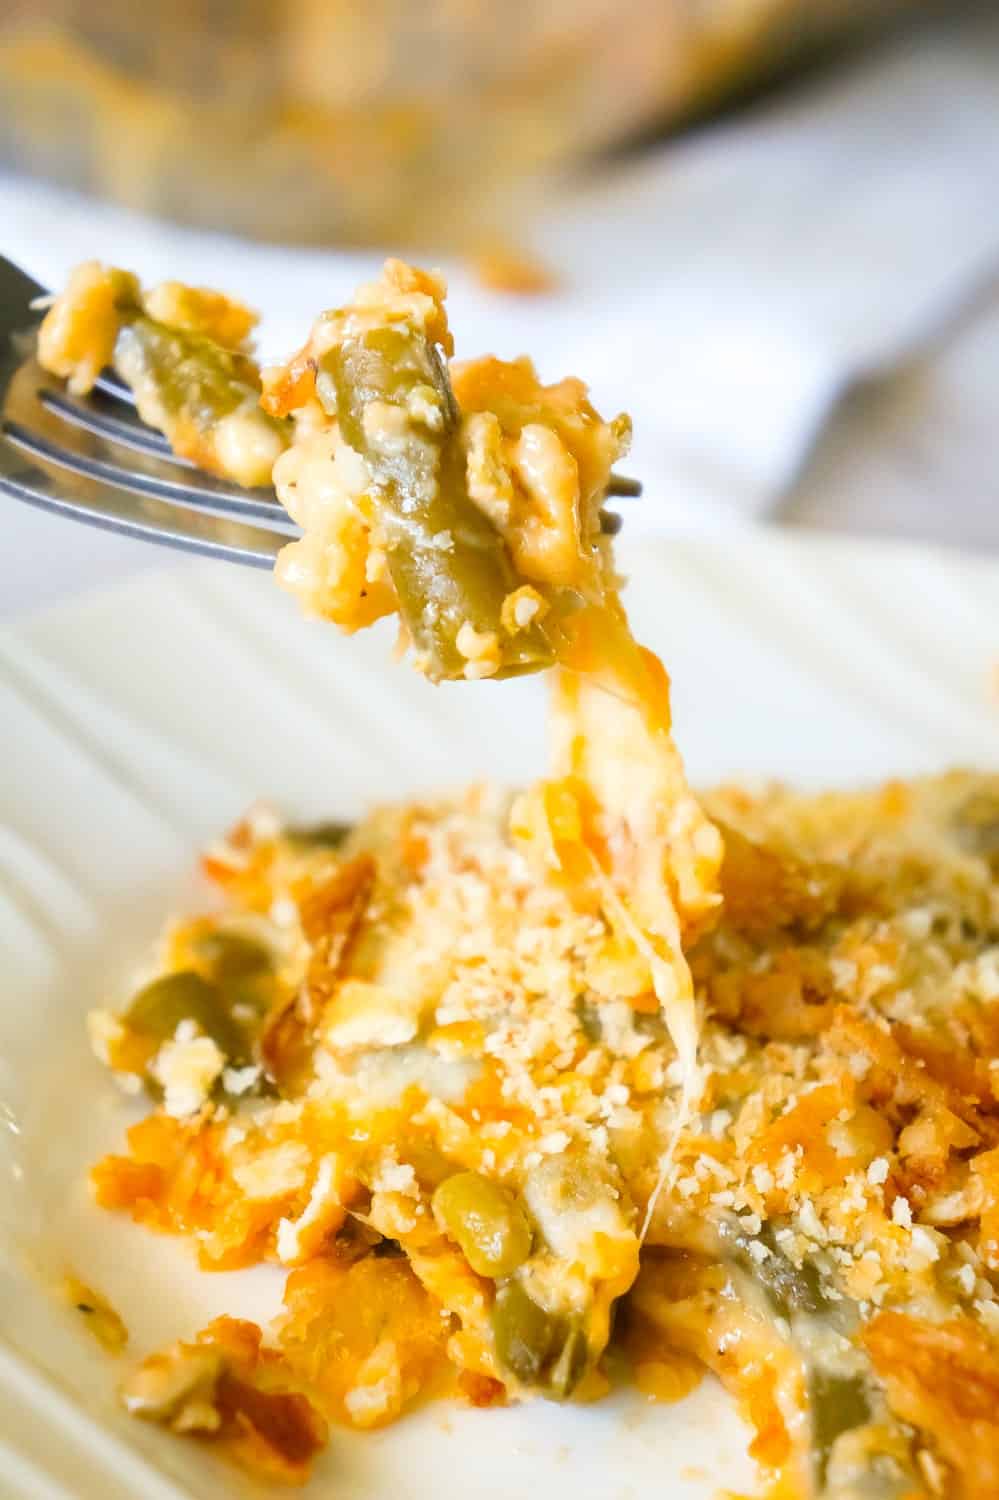 Cheesy Green Bean Casserole is an easy side dish recipe made with Campbell's cheddar cheese soup, shredded Parmesan, mozzarella, cheddar and topped with Townhouse Light and Buttery Original Crackers and French's Fried Onions.